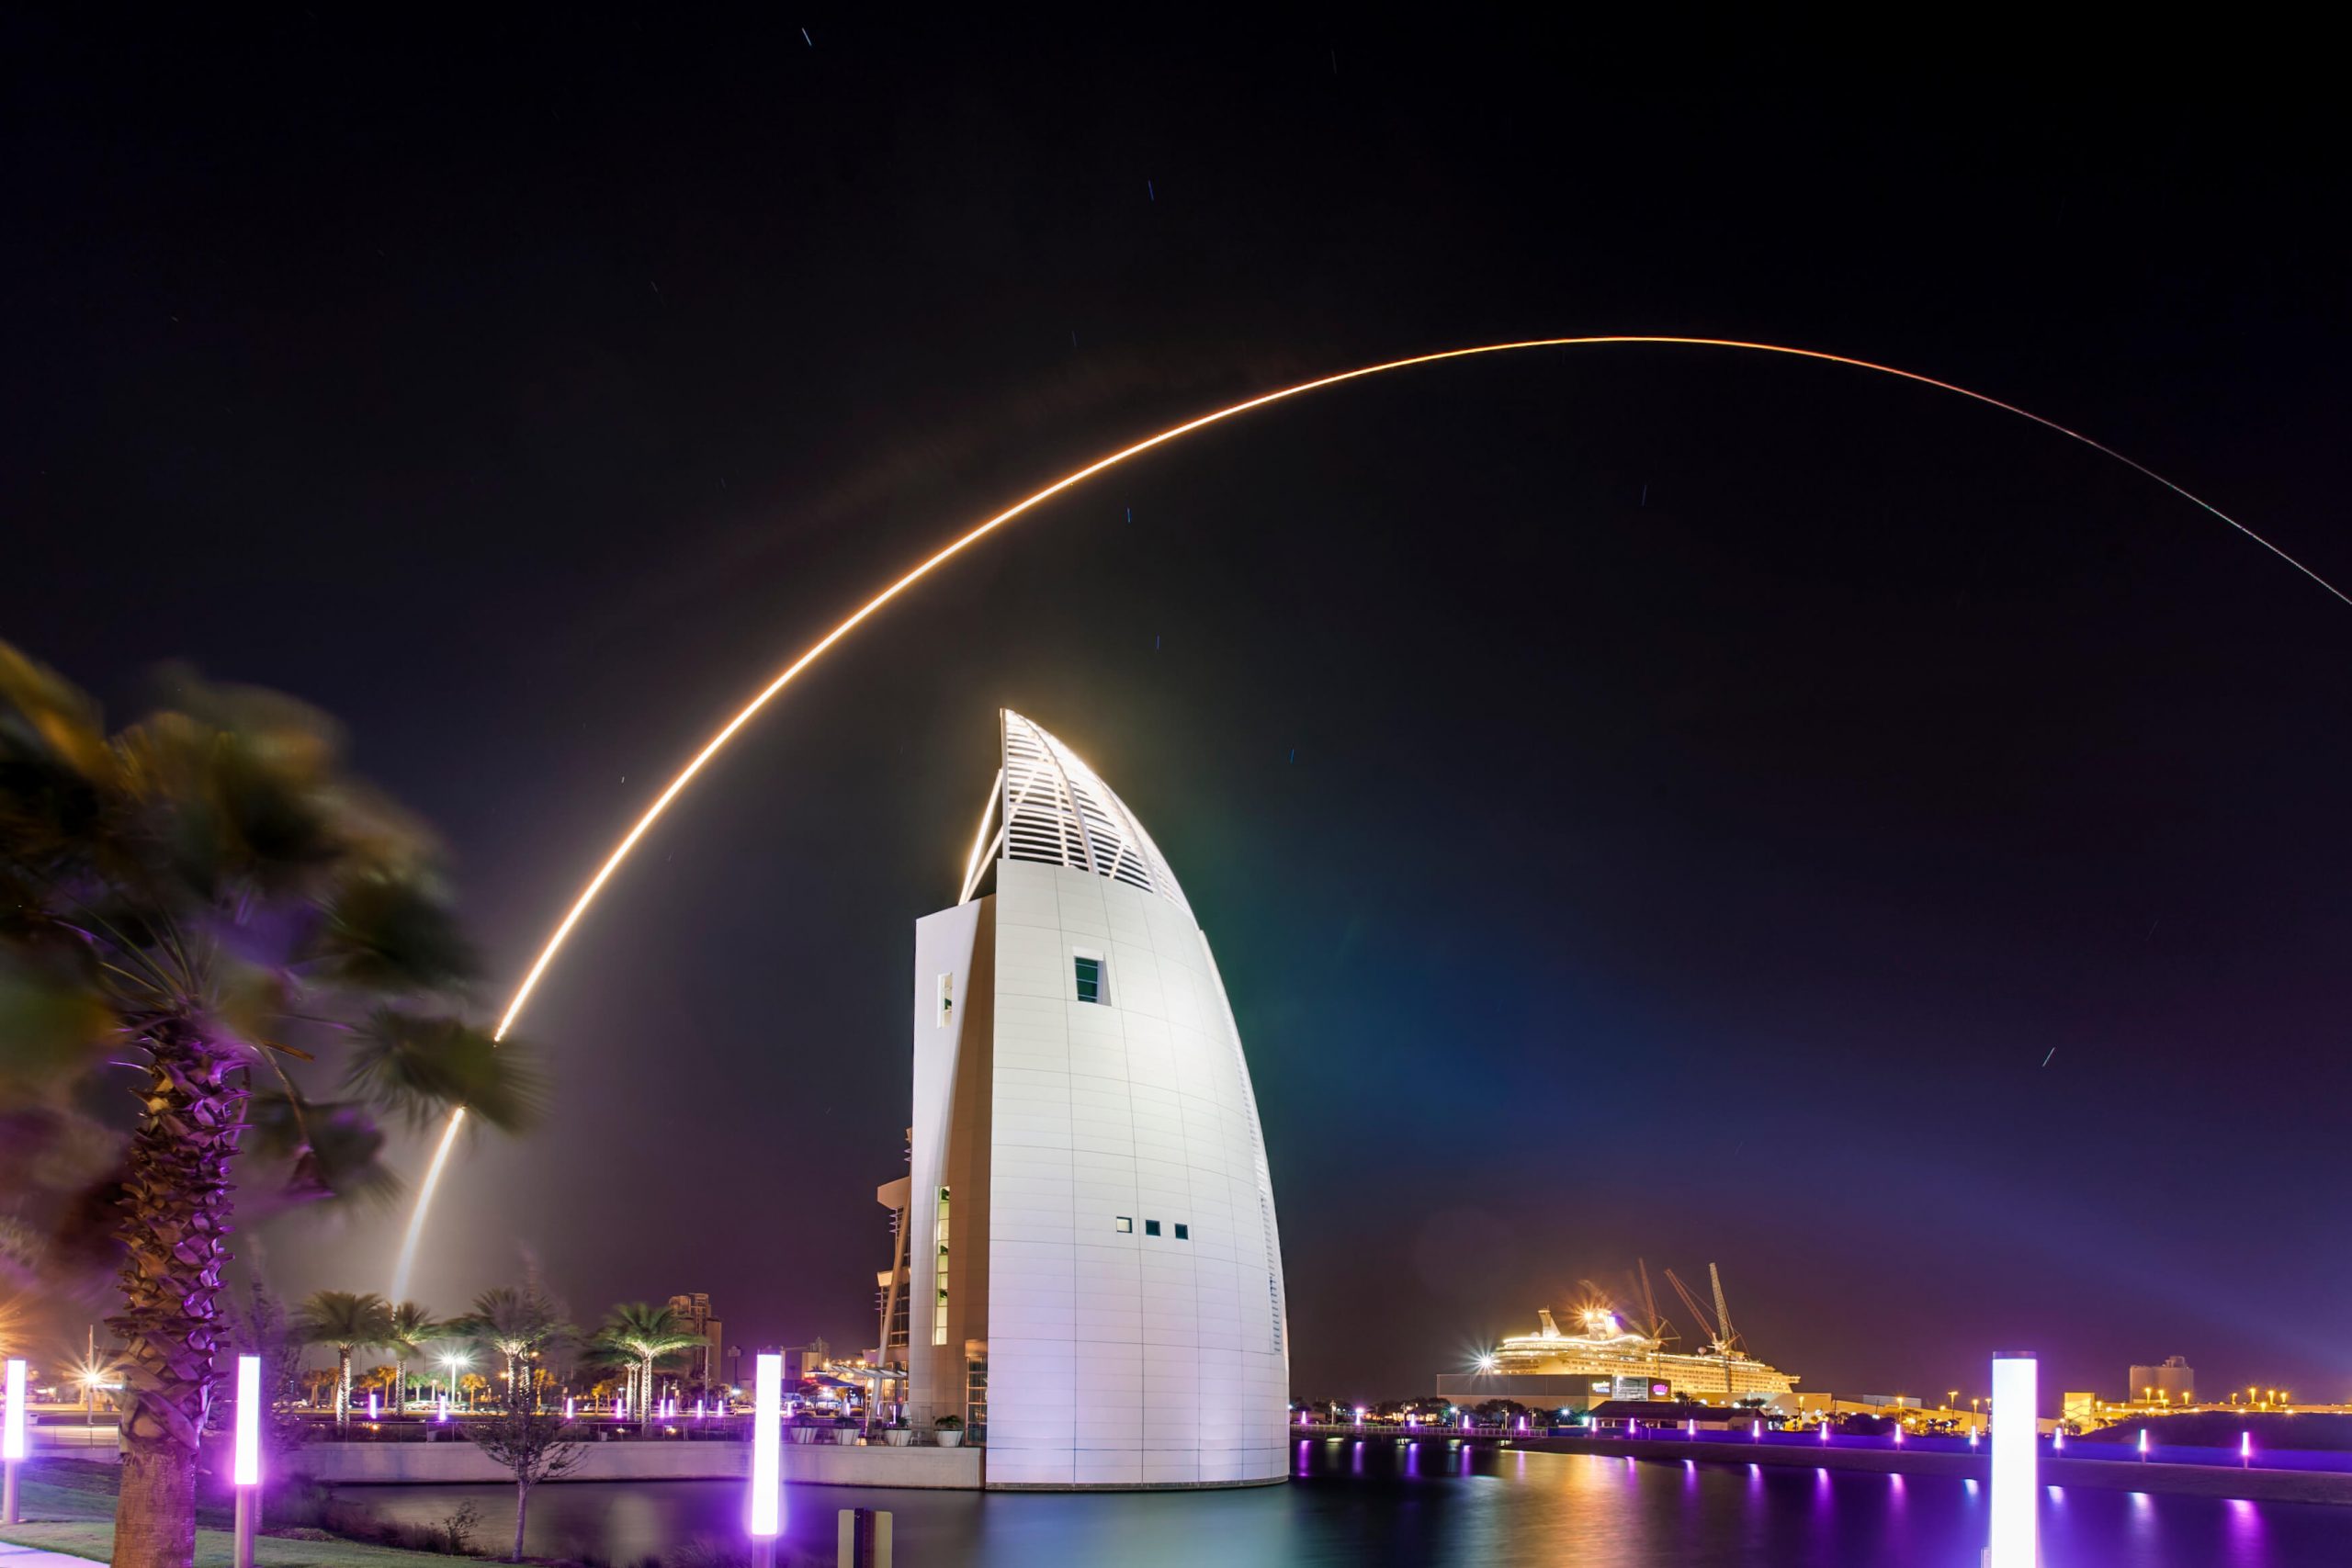 Rocket Launch over the Exploration Tower in Port Canaveral, FL